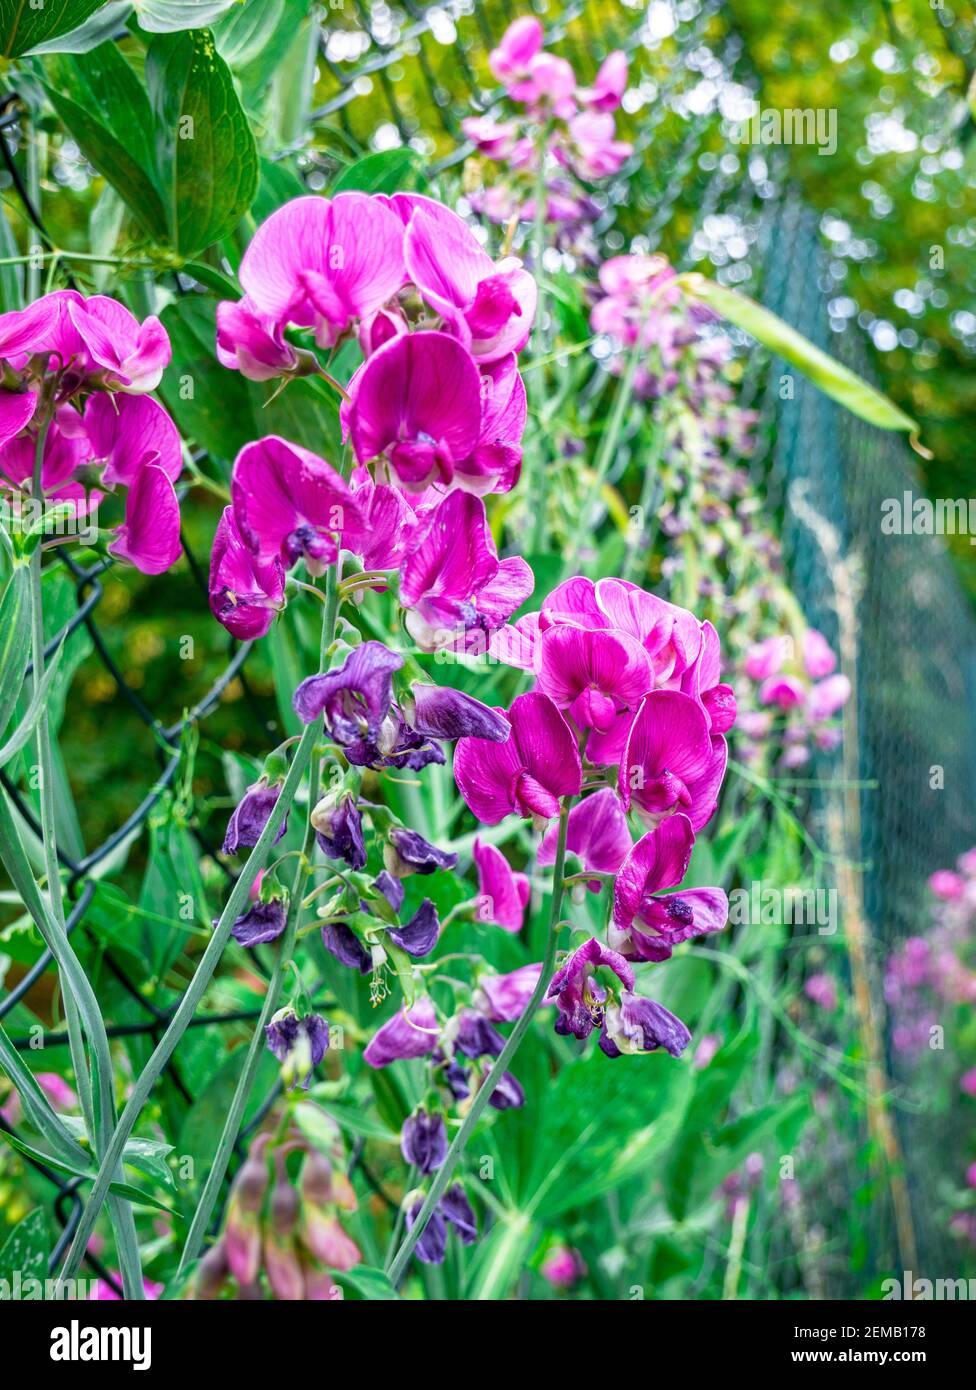 Blooming sweet pea (Lathyrus tuberosus) with a few withered flowers, on a wire fence in the background - Selective focus Stock Photo